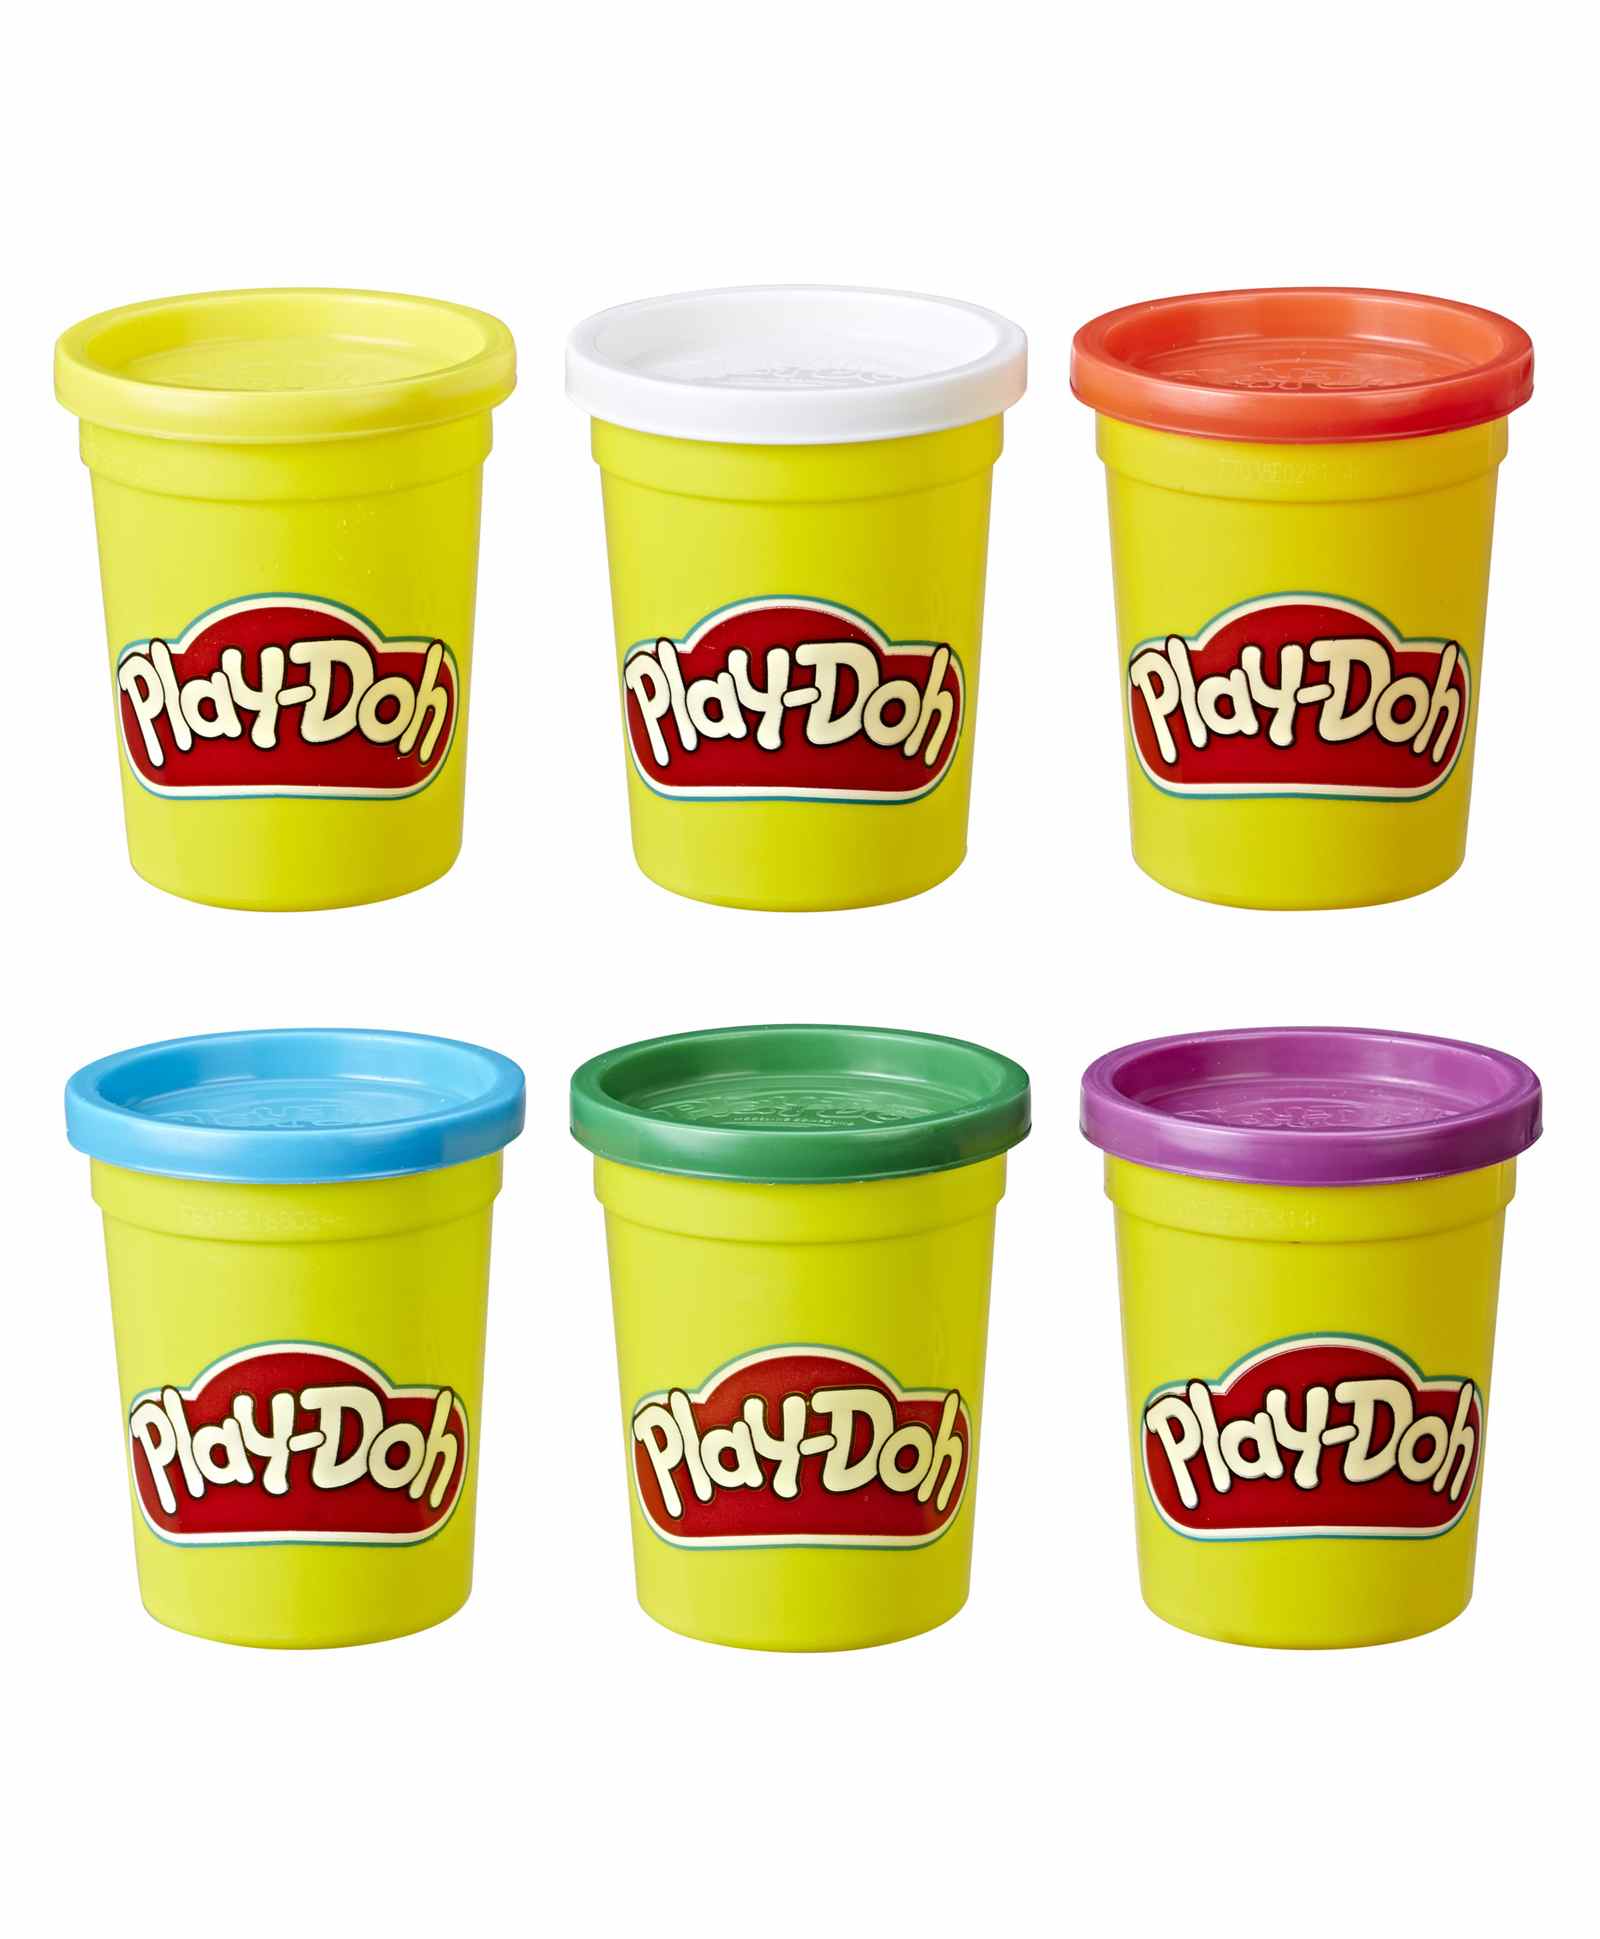 play doh clipart free - photo #8